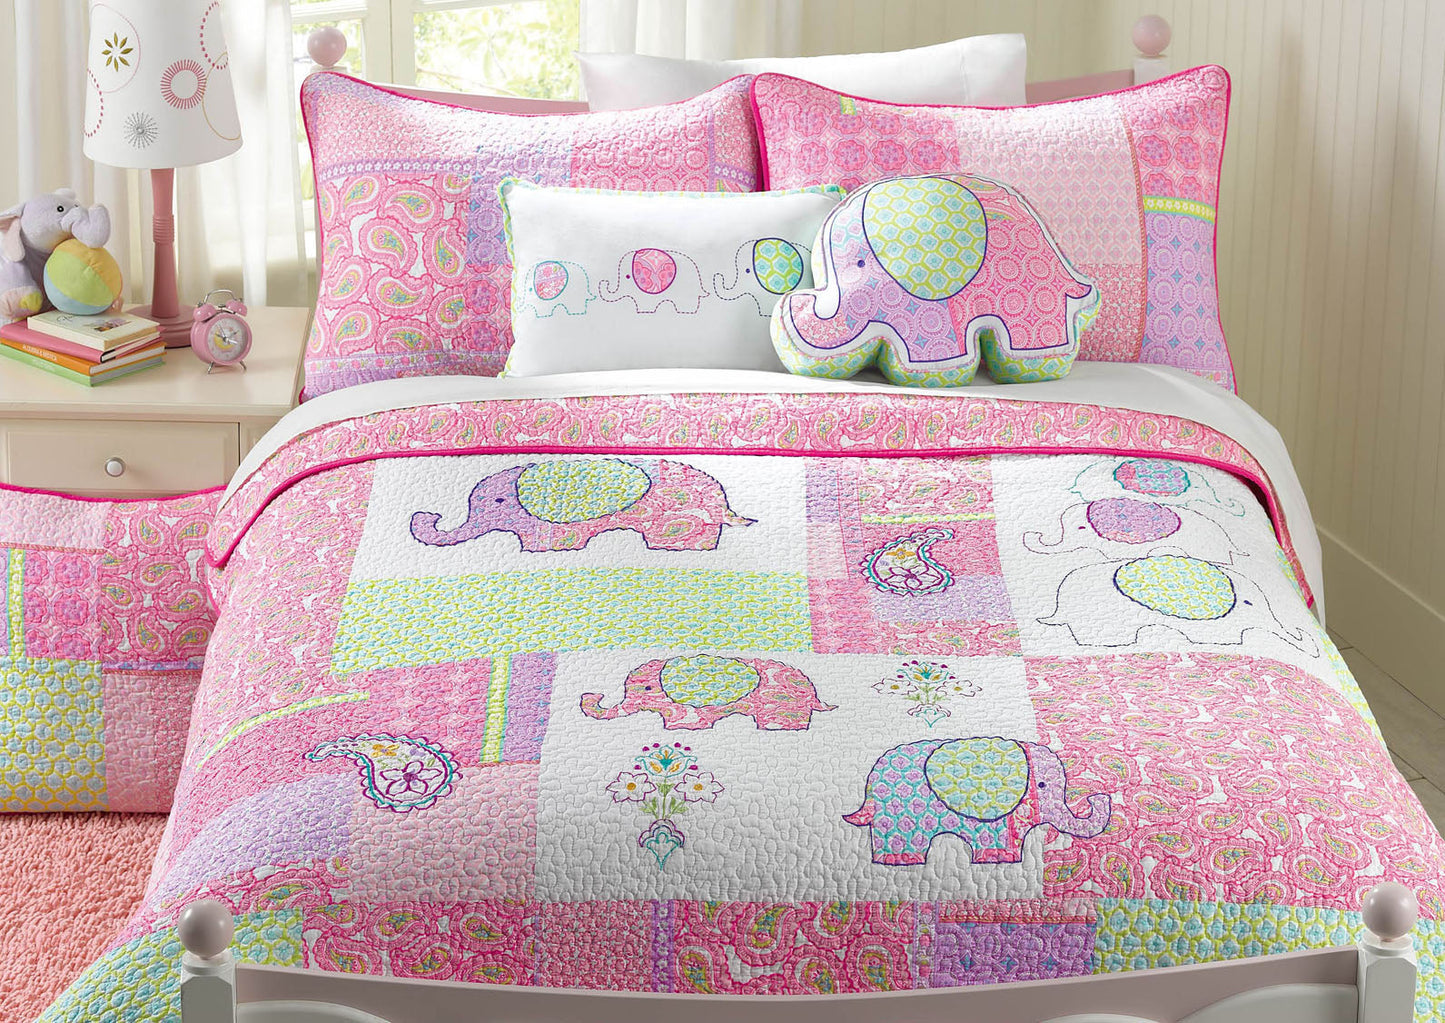 Pink Elephant Paisley Patchwork Embroidered Novelty Decor Throw Pillow